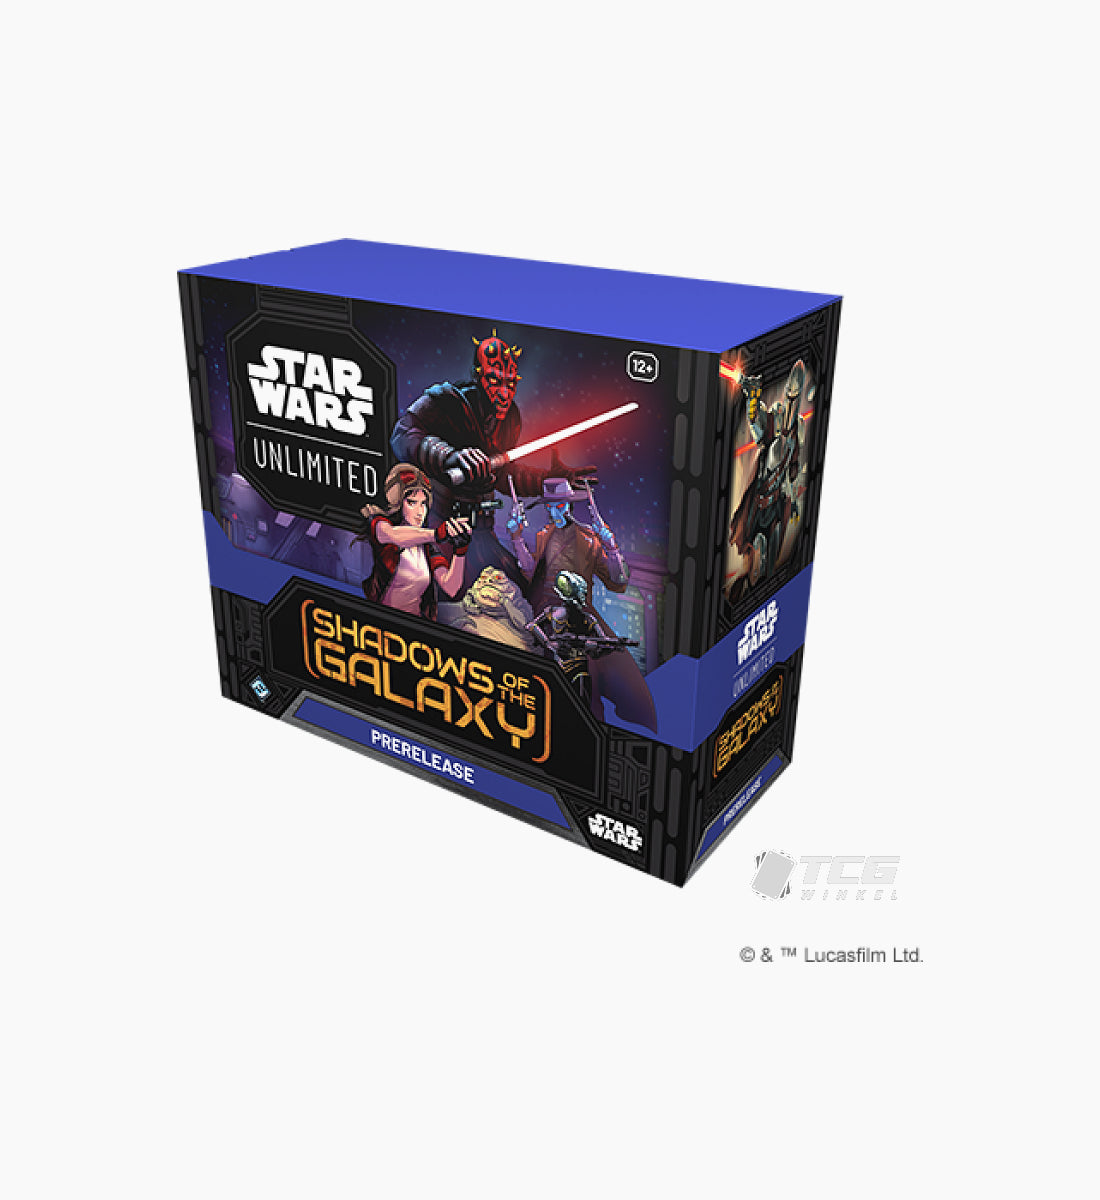 Star Wars Unlimited Shadows of the Galaxy Prerelease Box